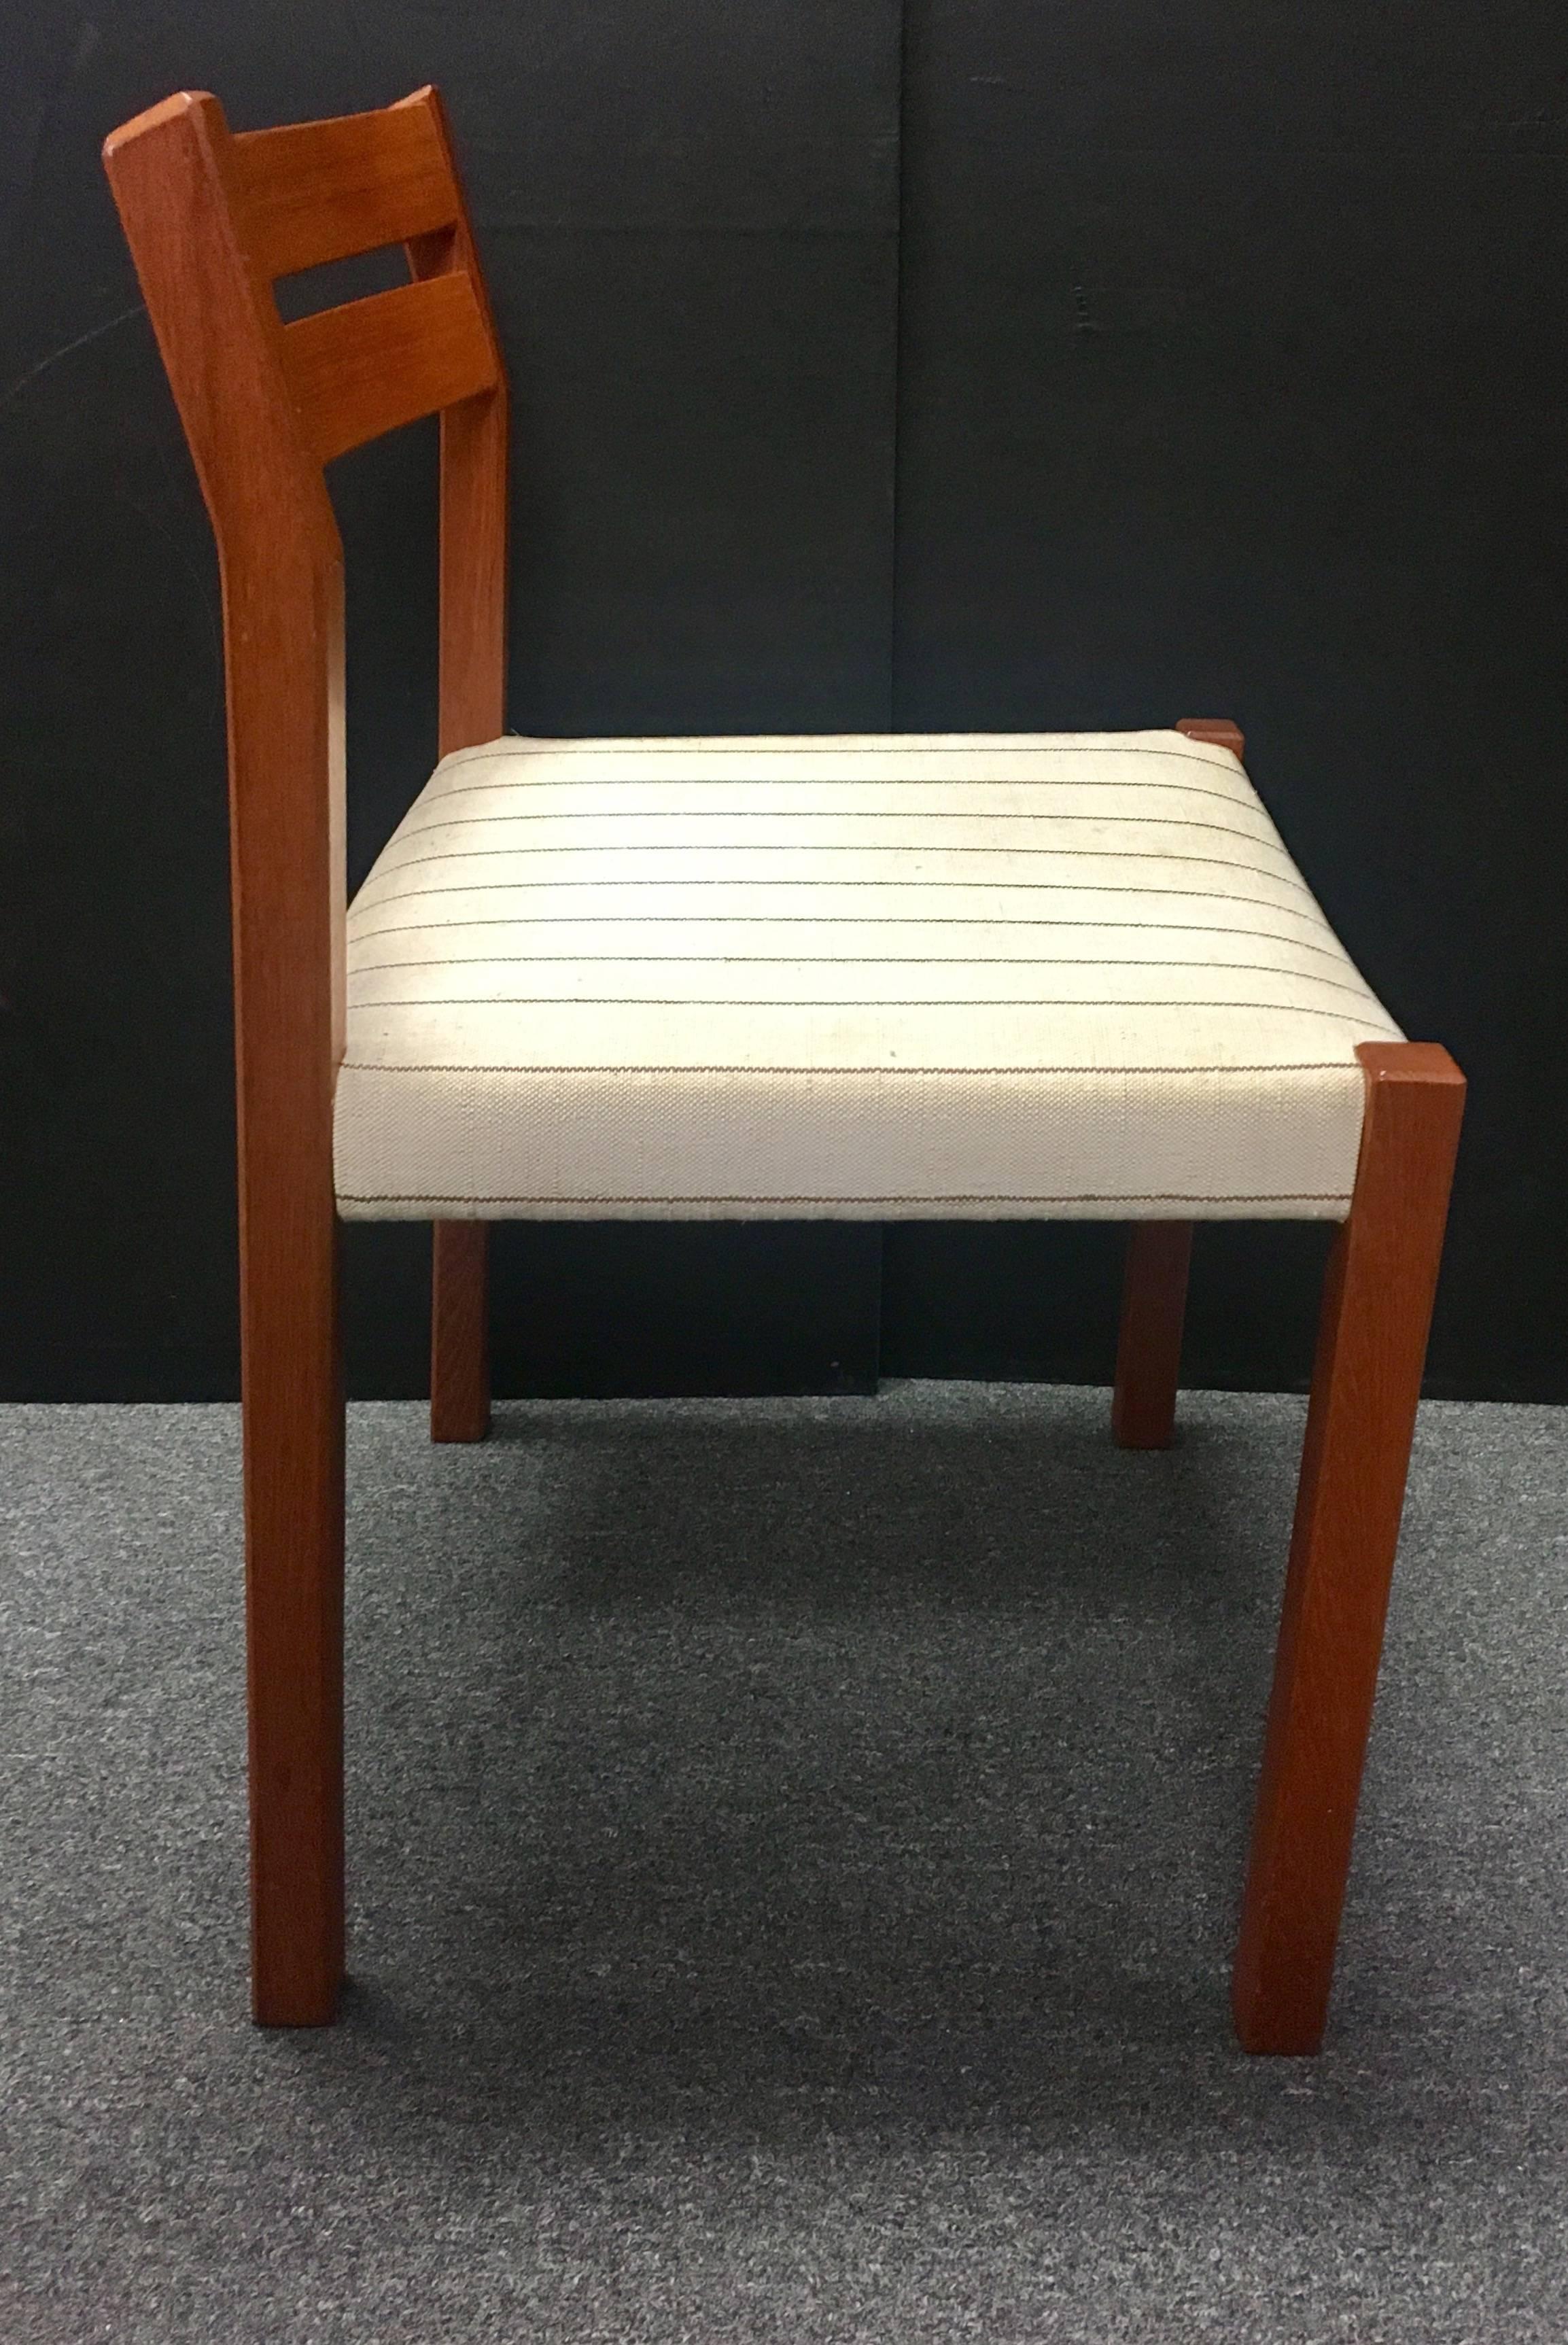 Great set of six Danish modern dining chairs attributed to Niels Moller. The chairs have solid teak frames with original striped Danish fabric (the fabric shows some wear and light stains and can be easily replaced if desired). The chairs are solid